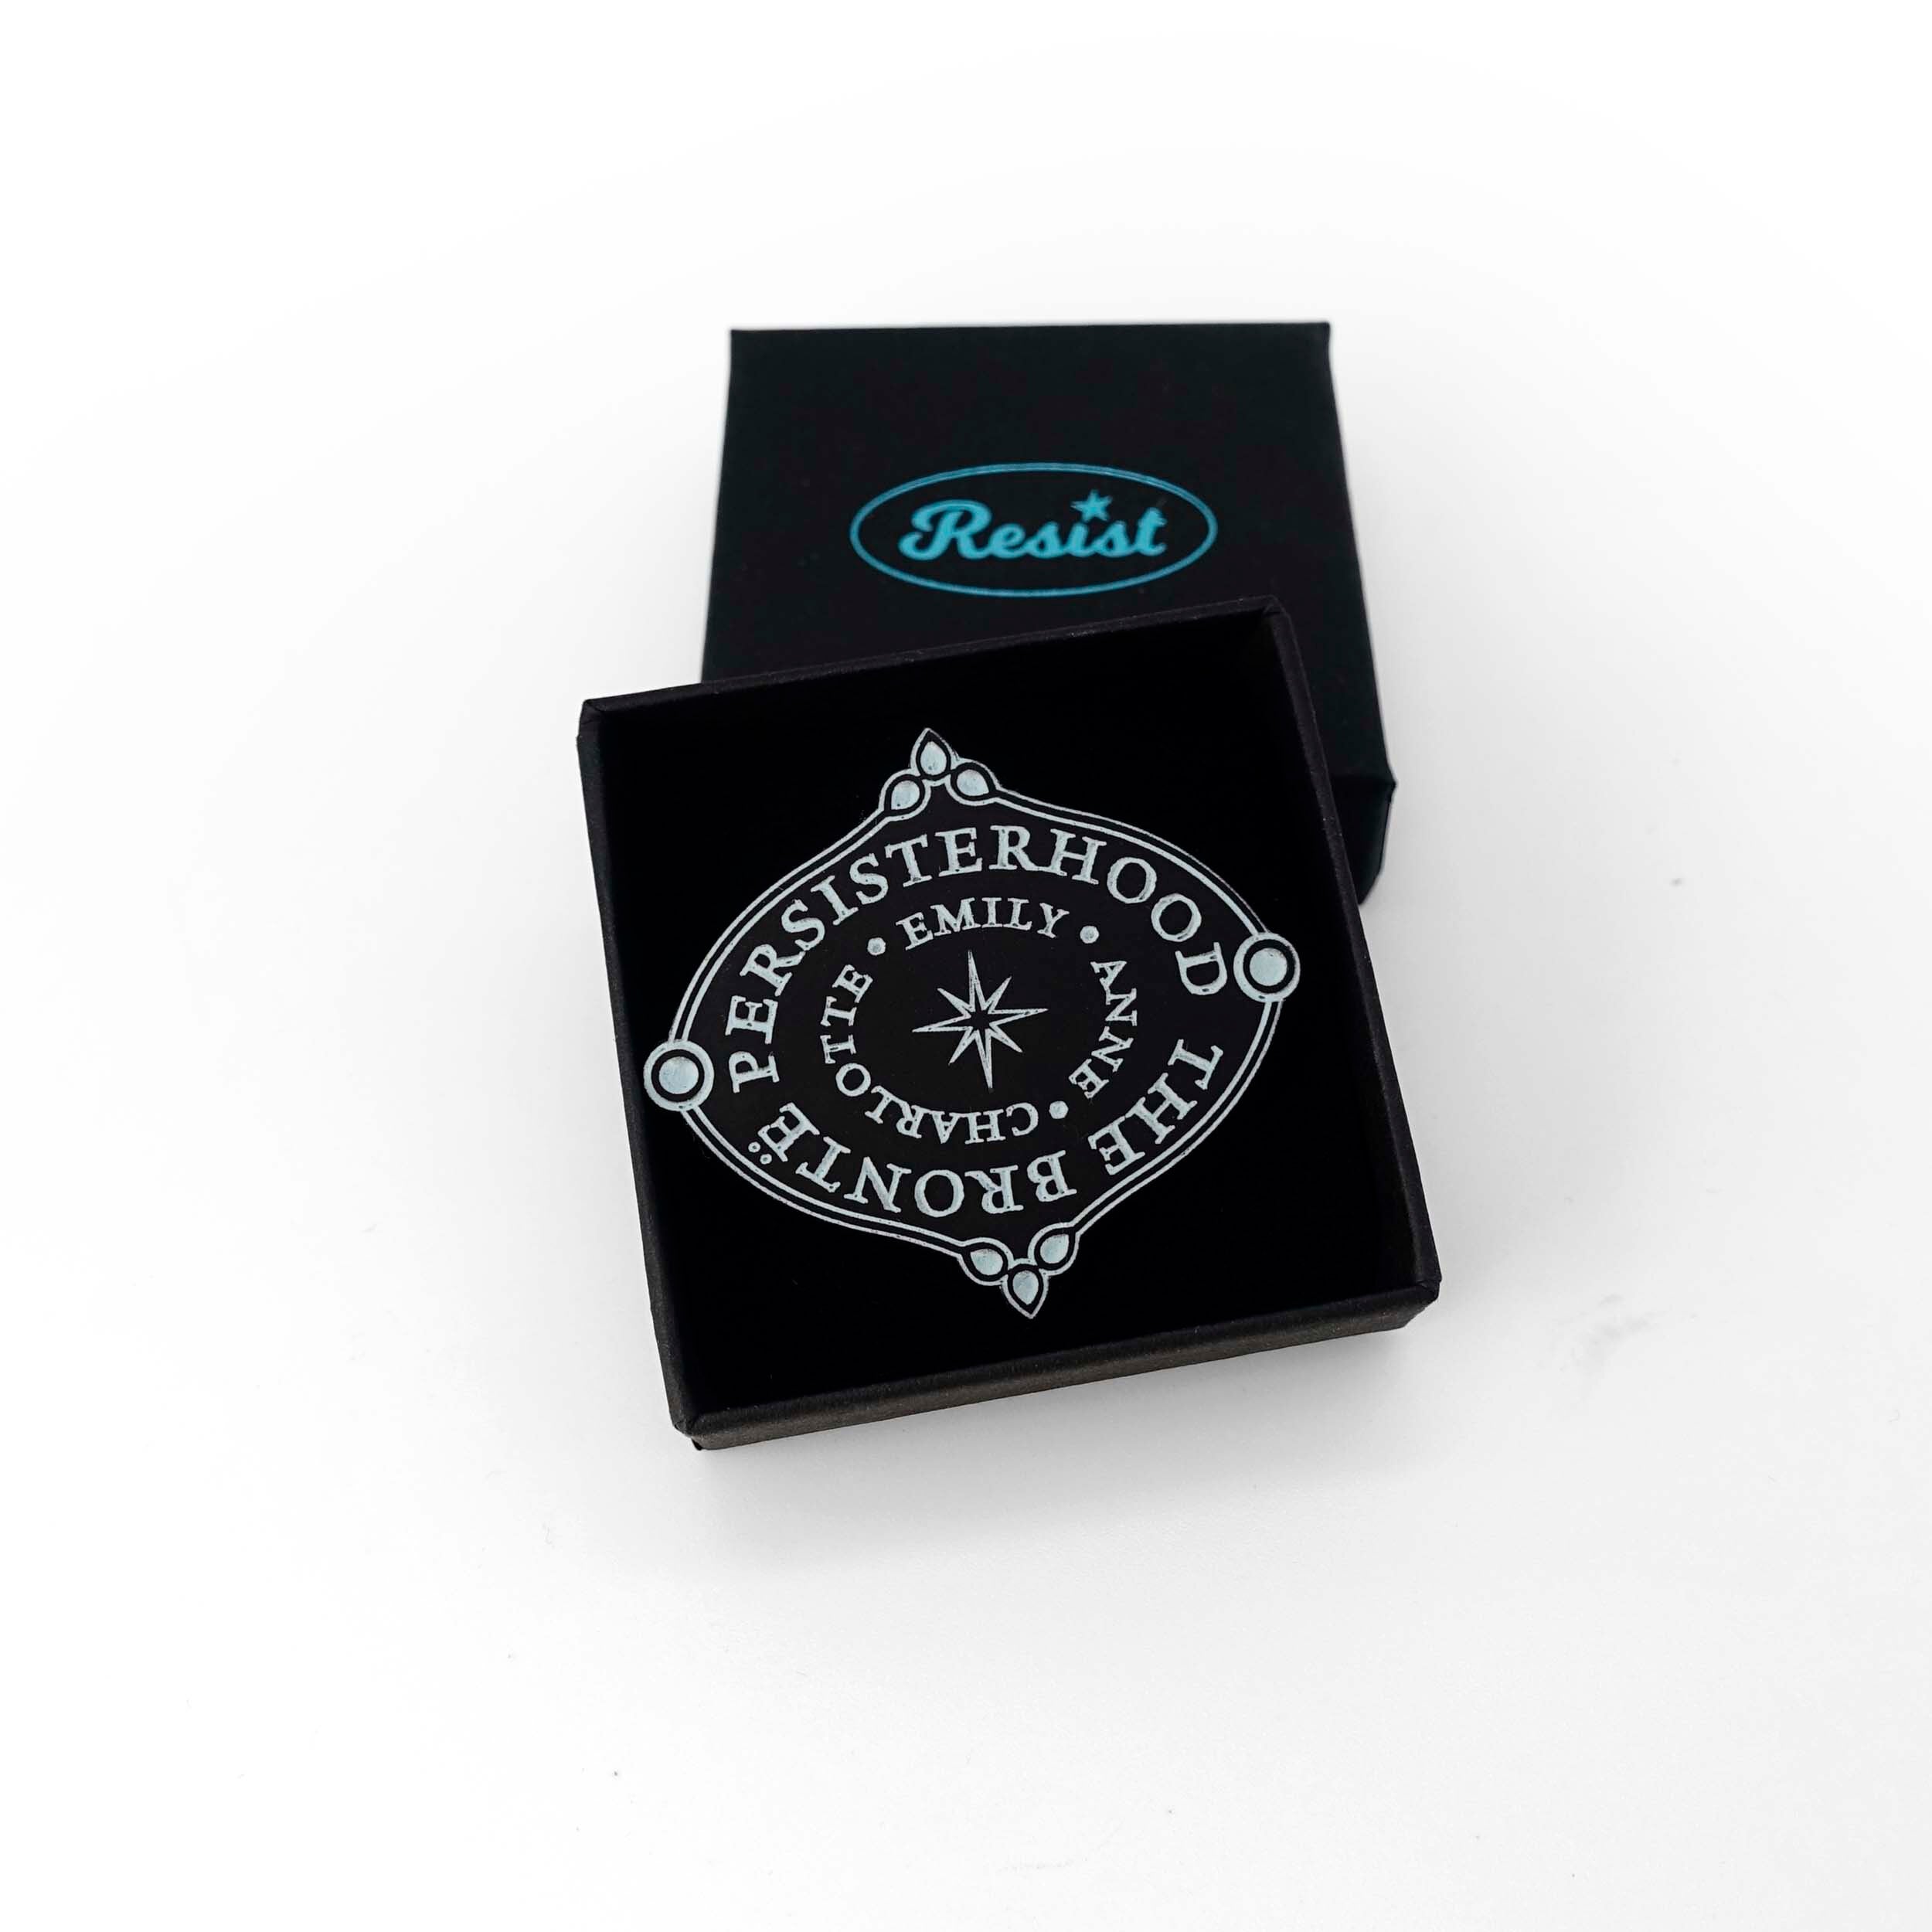 The Brontë Persisterhood brooch: Charlotte, Emily Anne, one of the greatest Persisterhoods in literature. The words are etched in glow-in-the-dark pigment. Shown in a Wear and Resist gift box. 